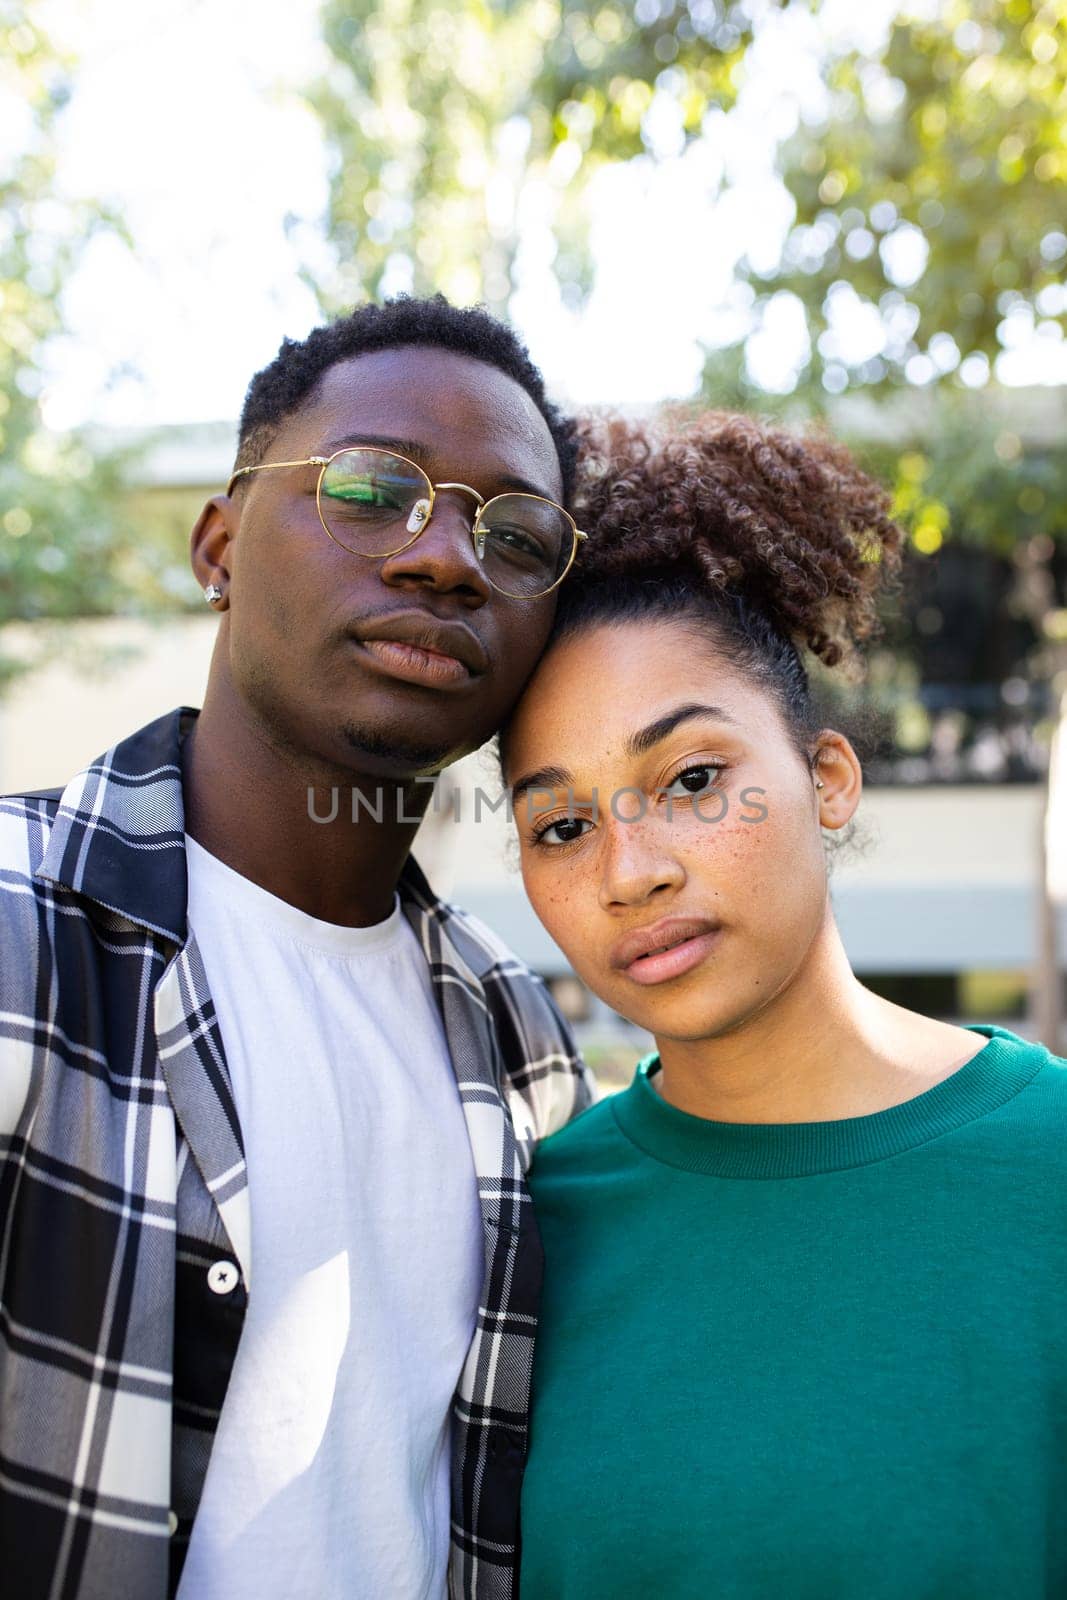 Vertical portrait of African American young couple outdoors looking at camera with serious expression. Relationship concept.